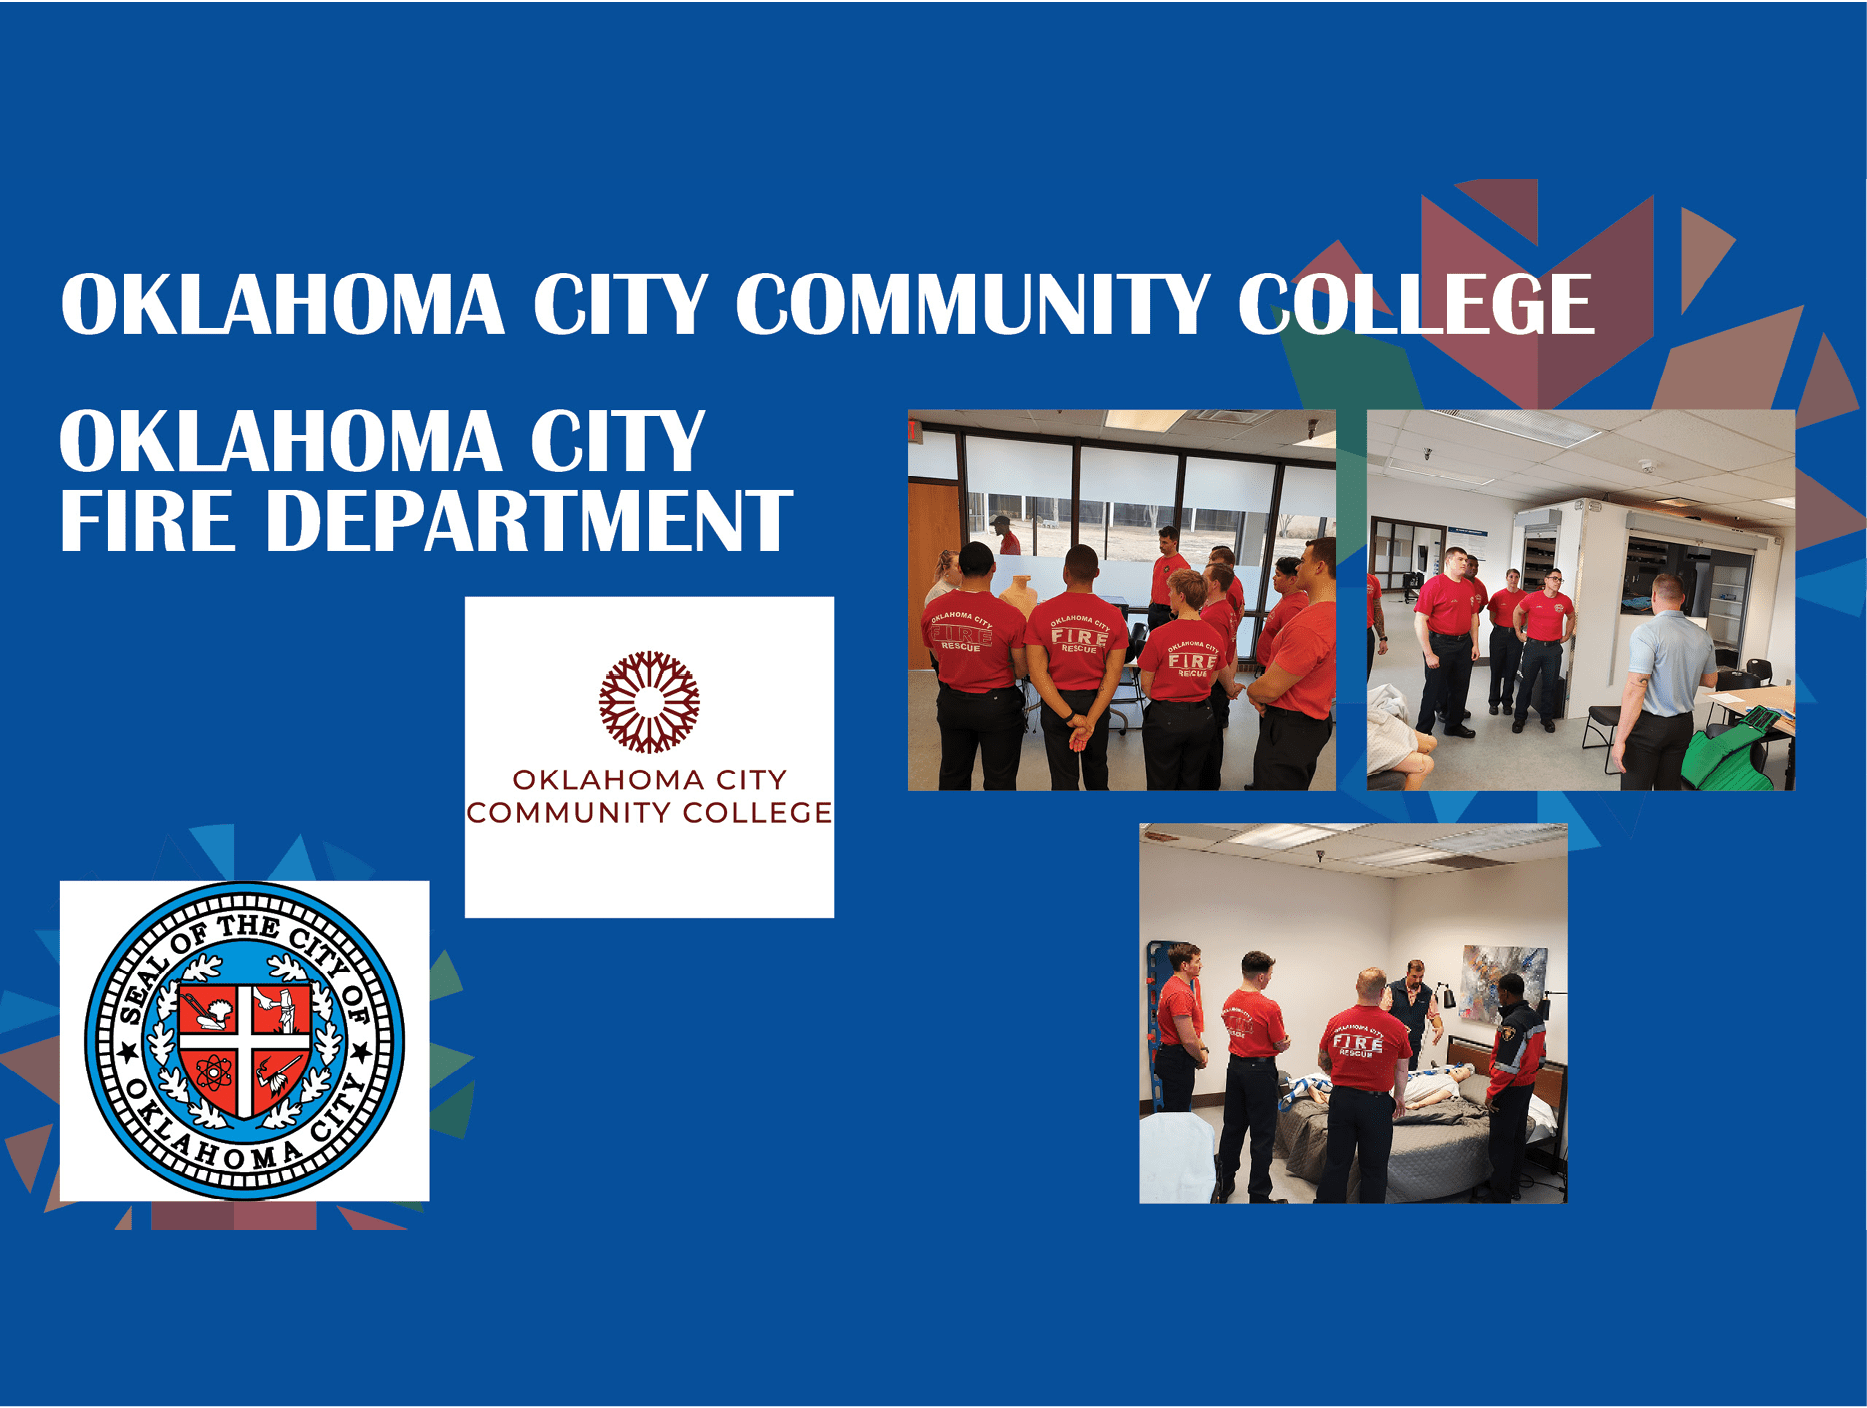 Oklahoma City Community College and Oklahoma City Fire Department